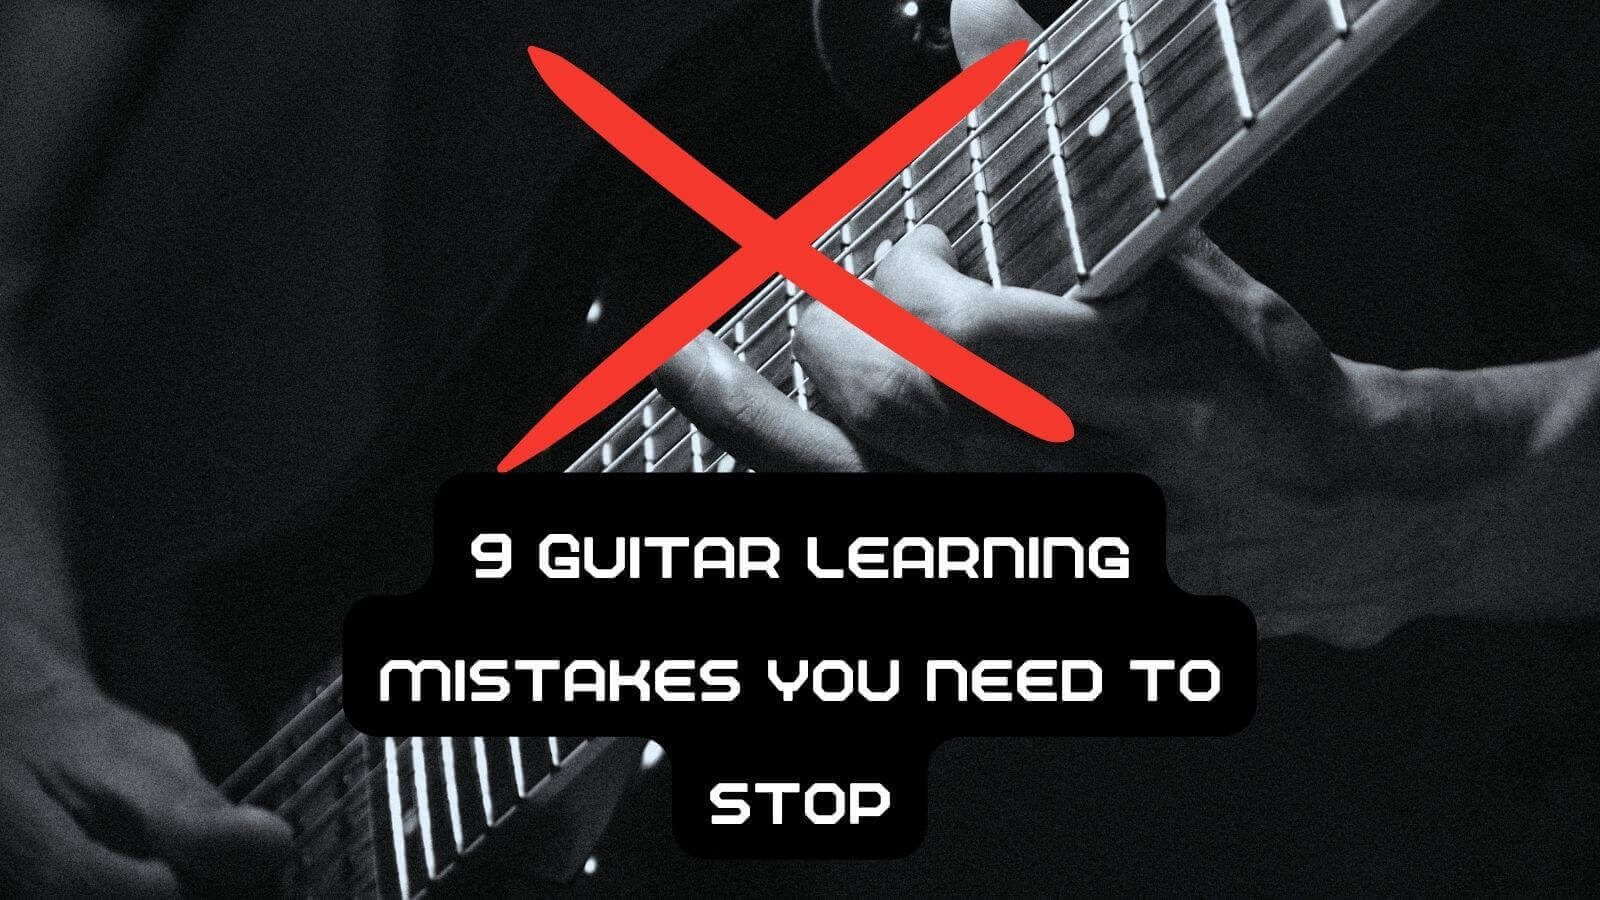 9 guitar mistakes you need to stop to unlock real progress